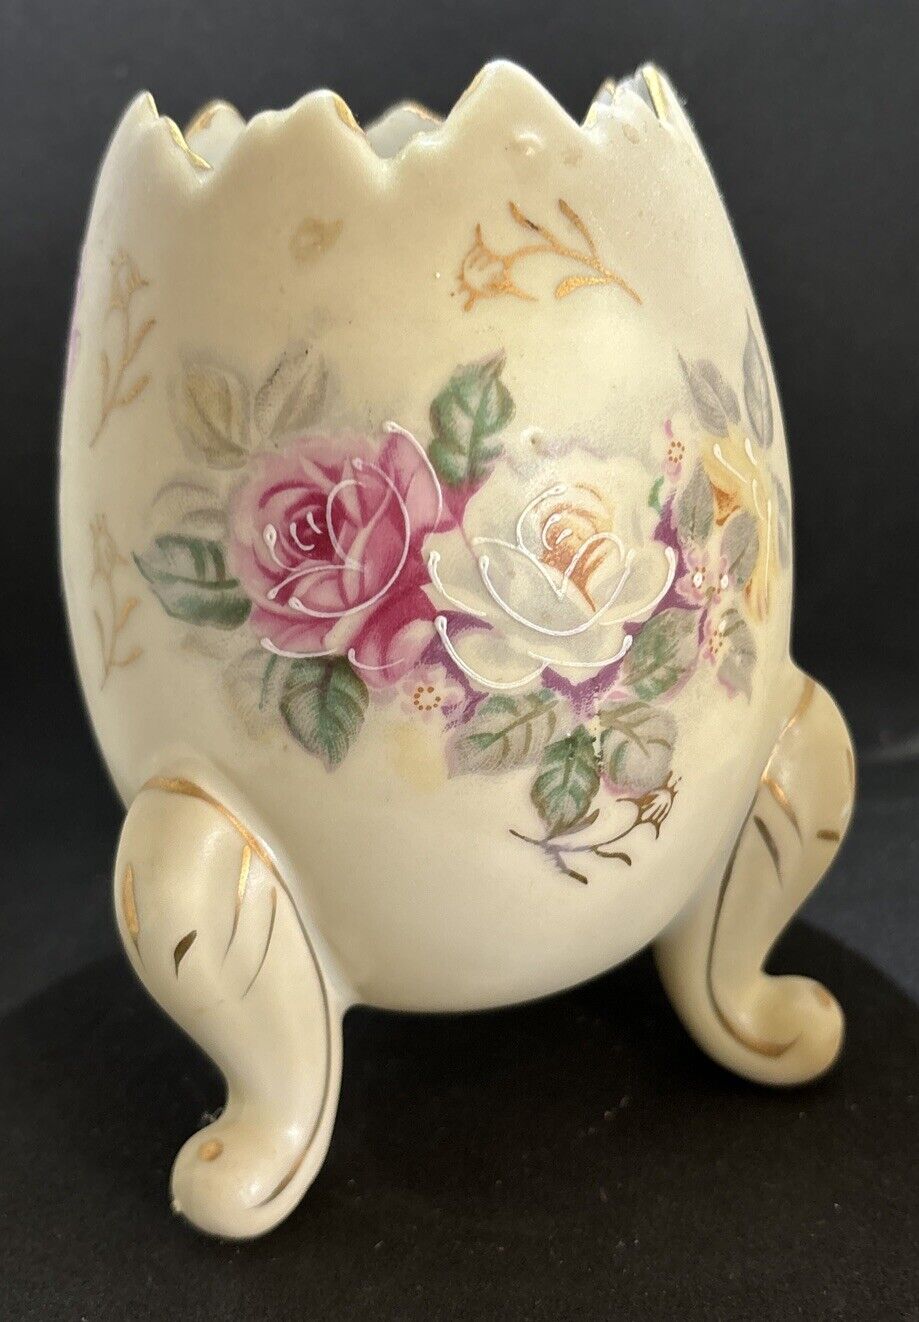 Inarco 5” Footed Cracked Egg Vase Pink & White Roses